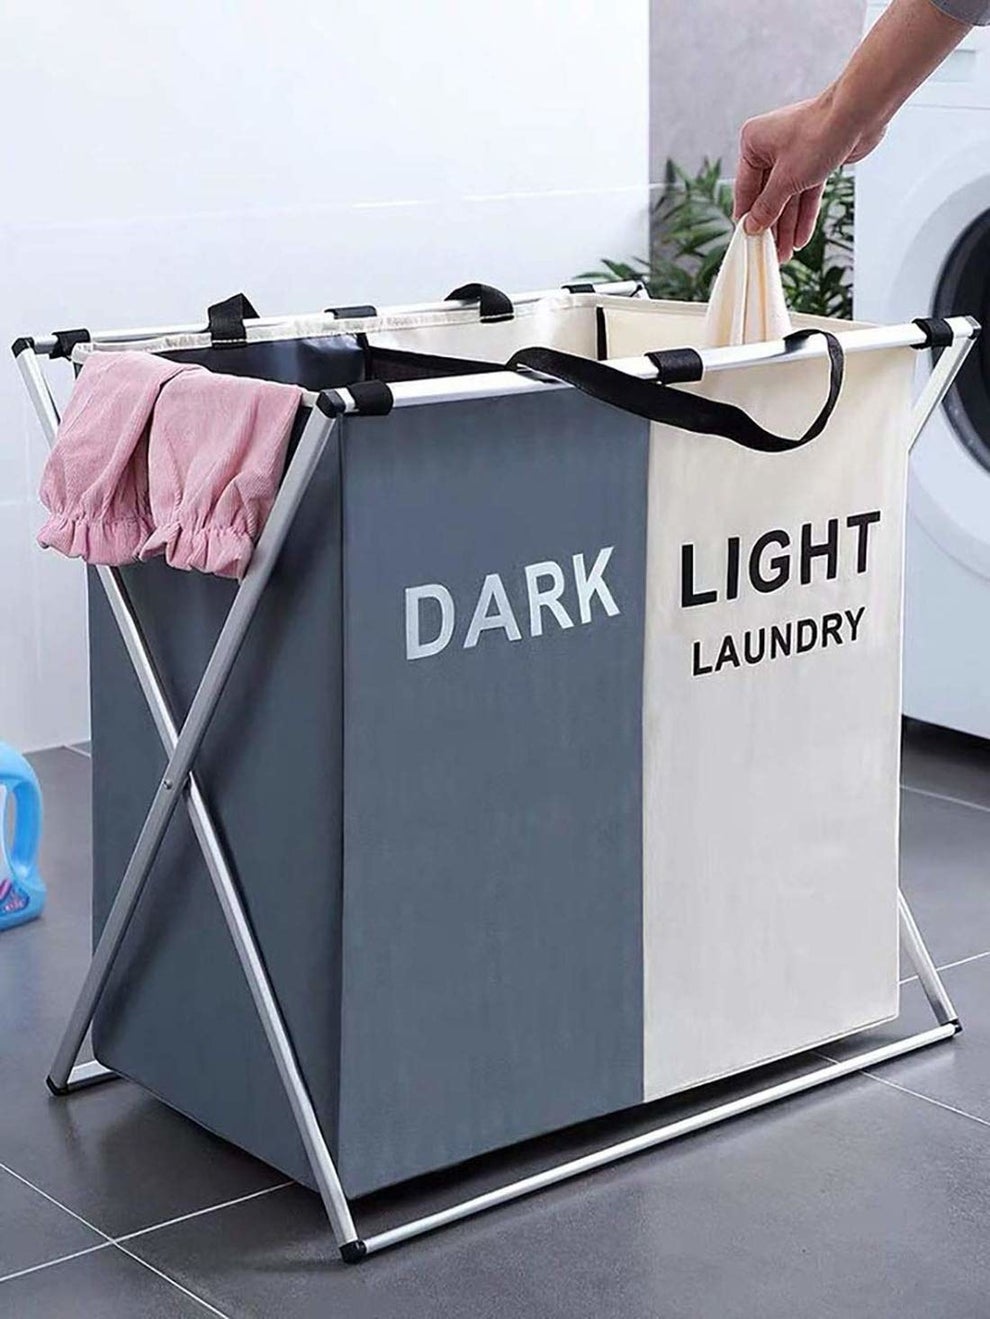 Laundry Products That'll Make Washing Clothes Easier